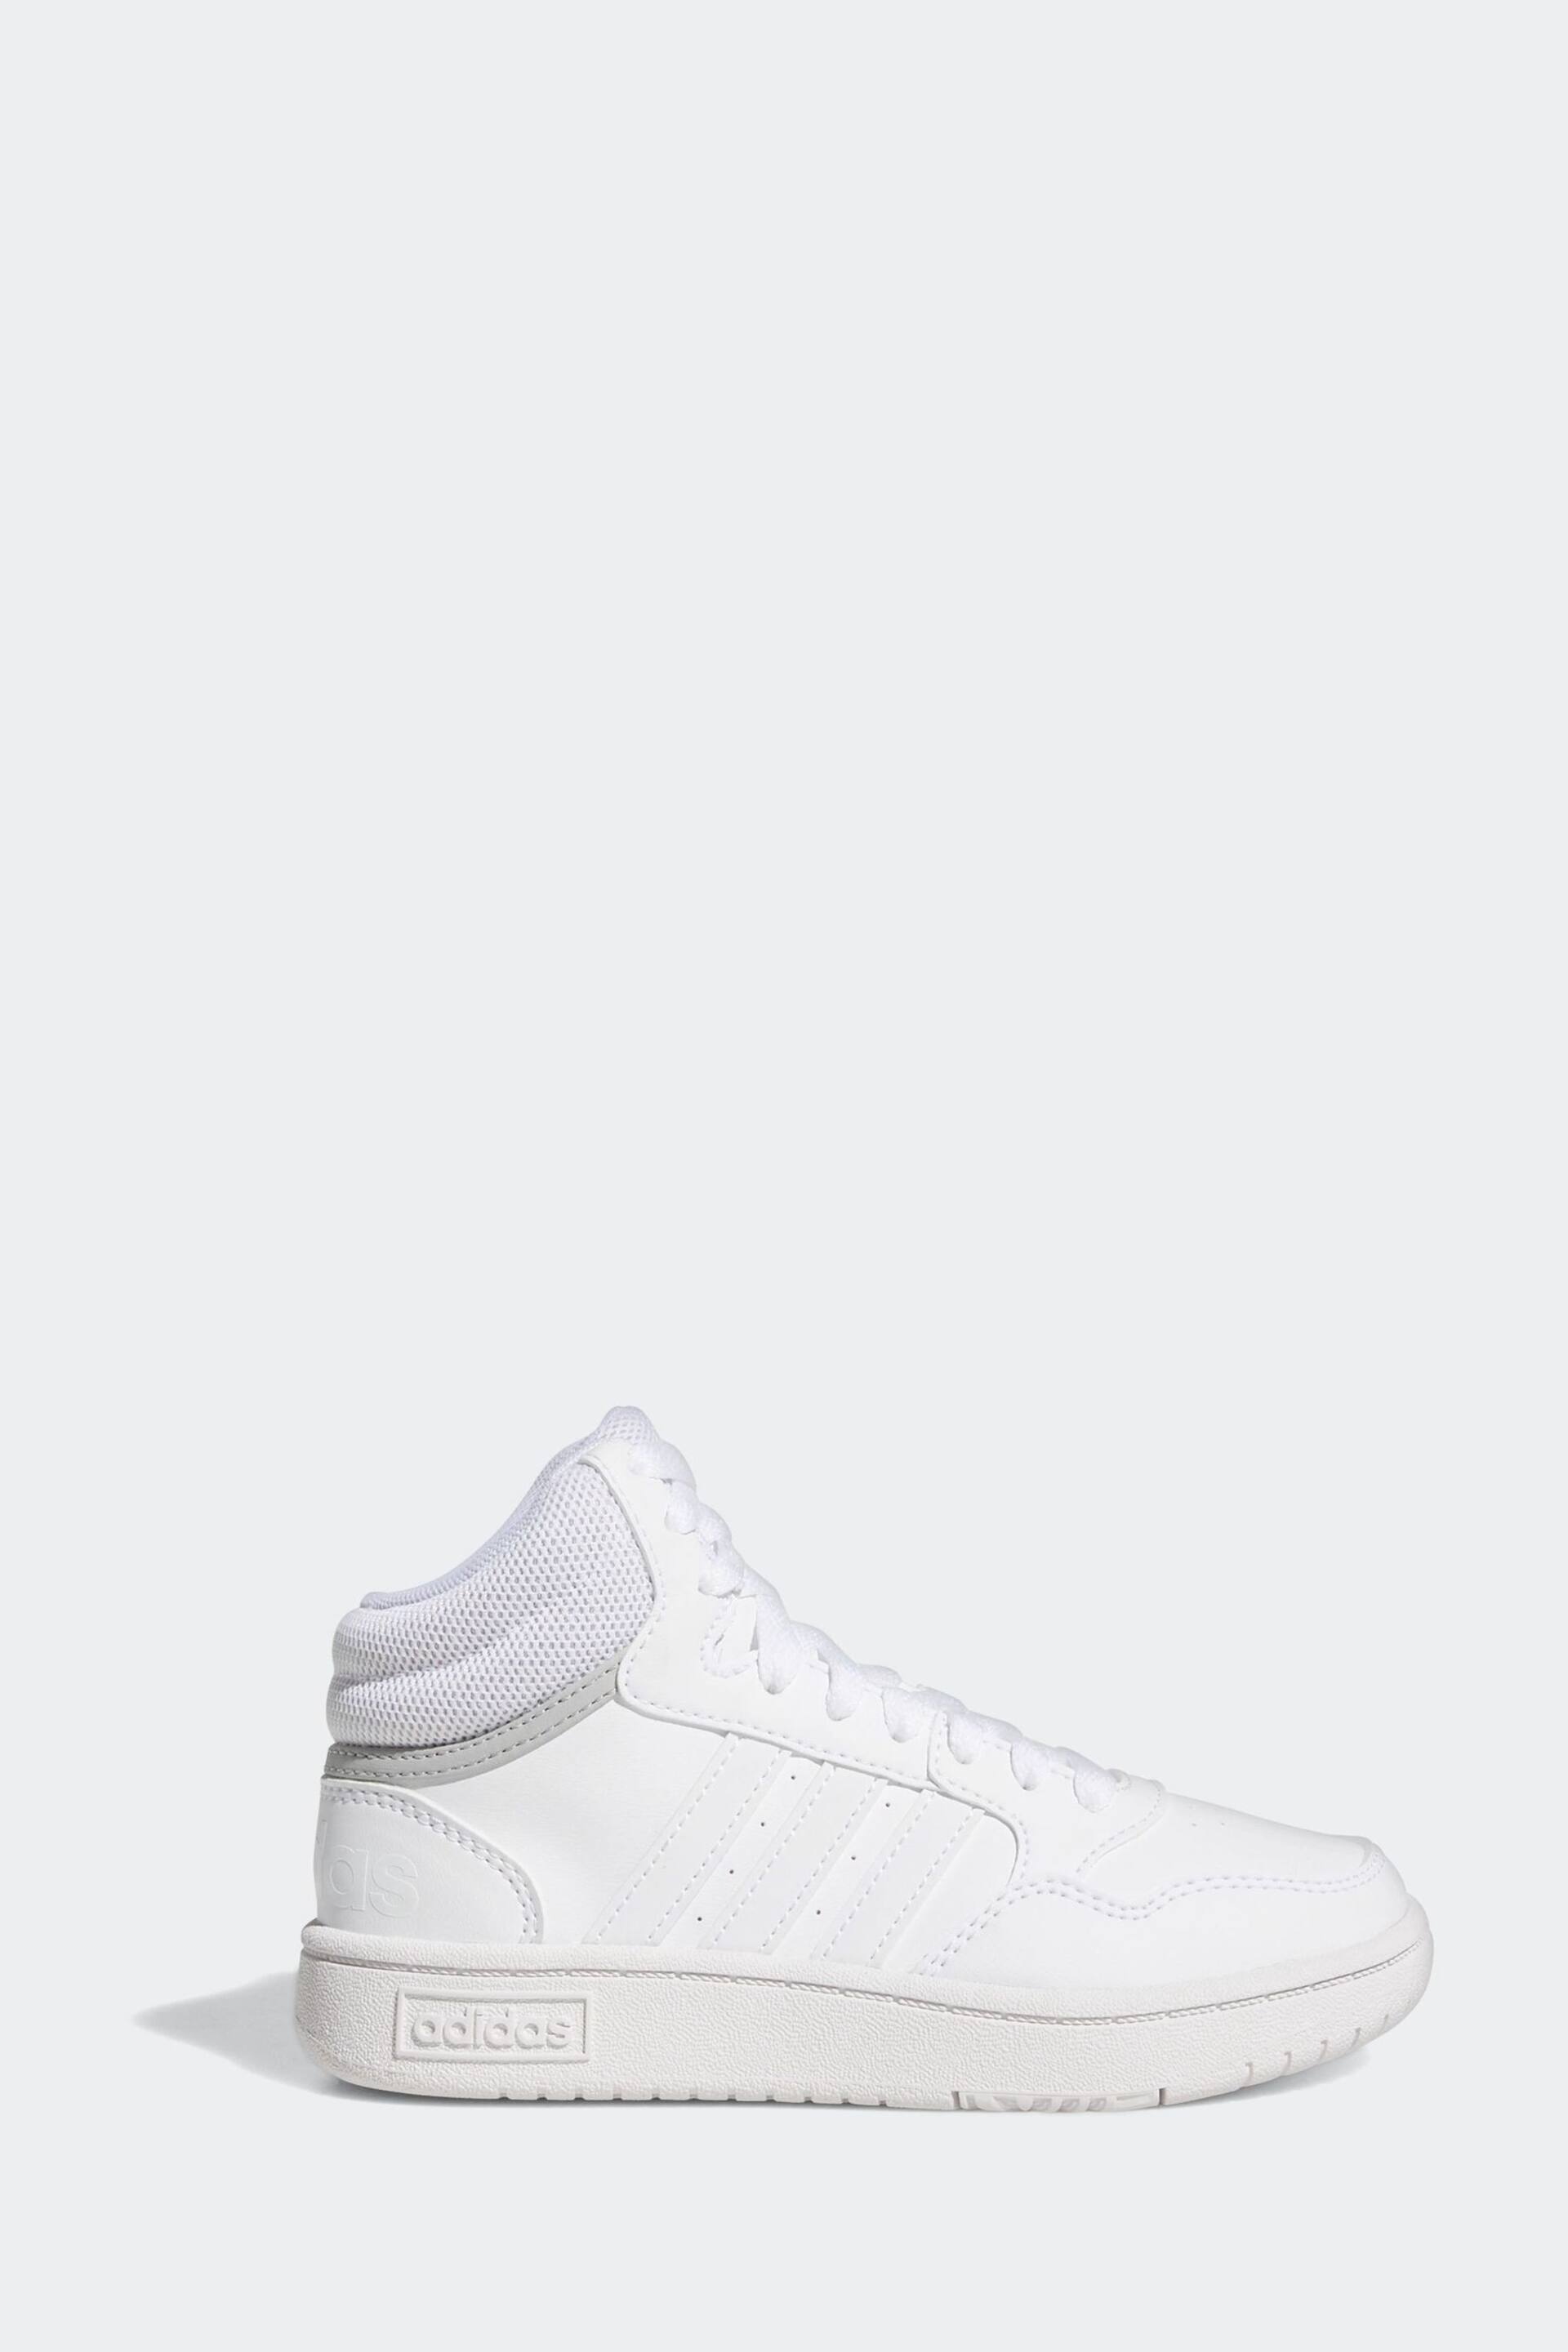 adidas White Hoops Mid Shoes - Image 3 of 9